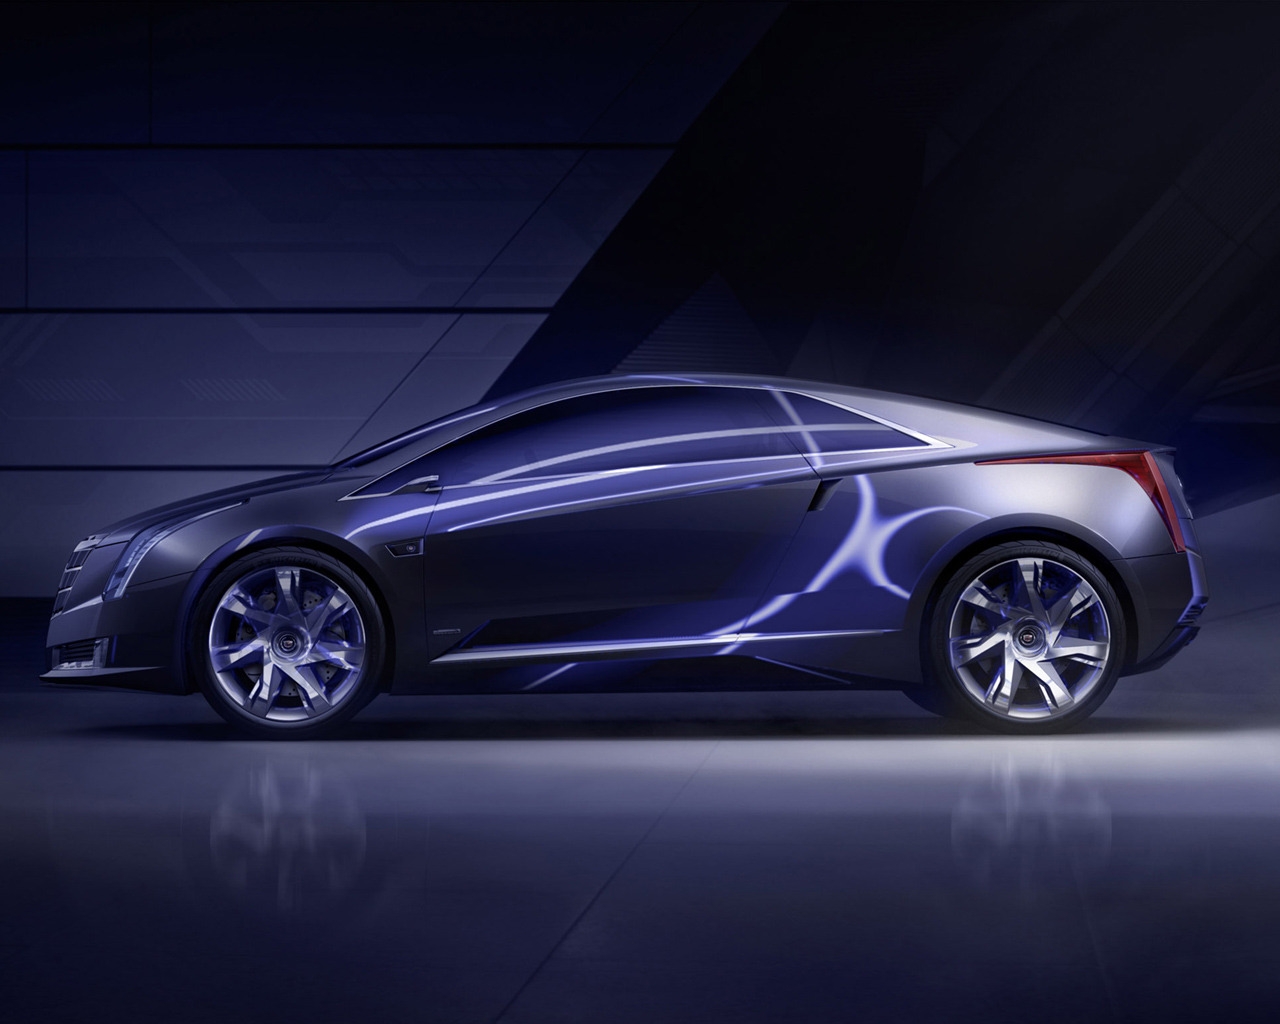 Cadillac Converj Concept Side for 1280 x 1024 resolution